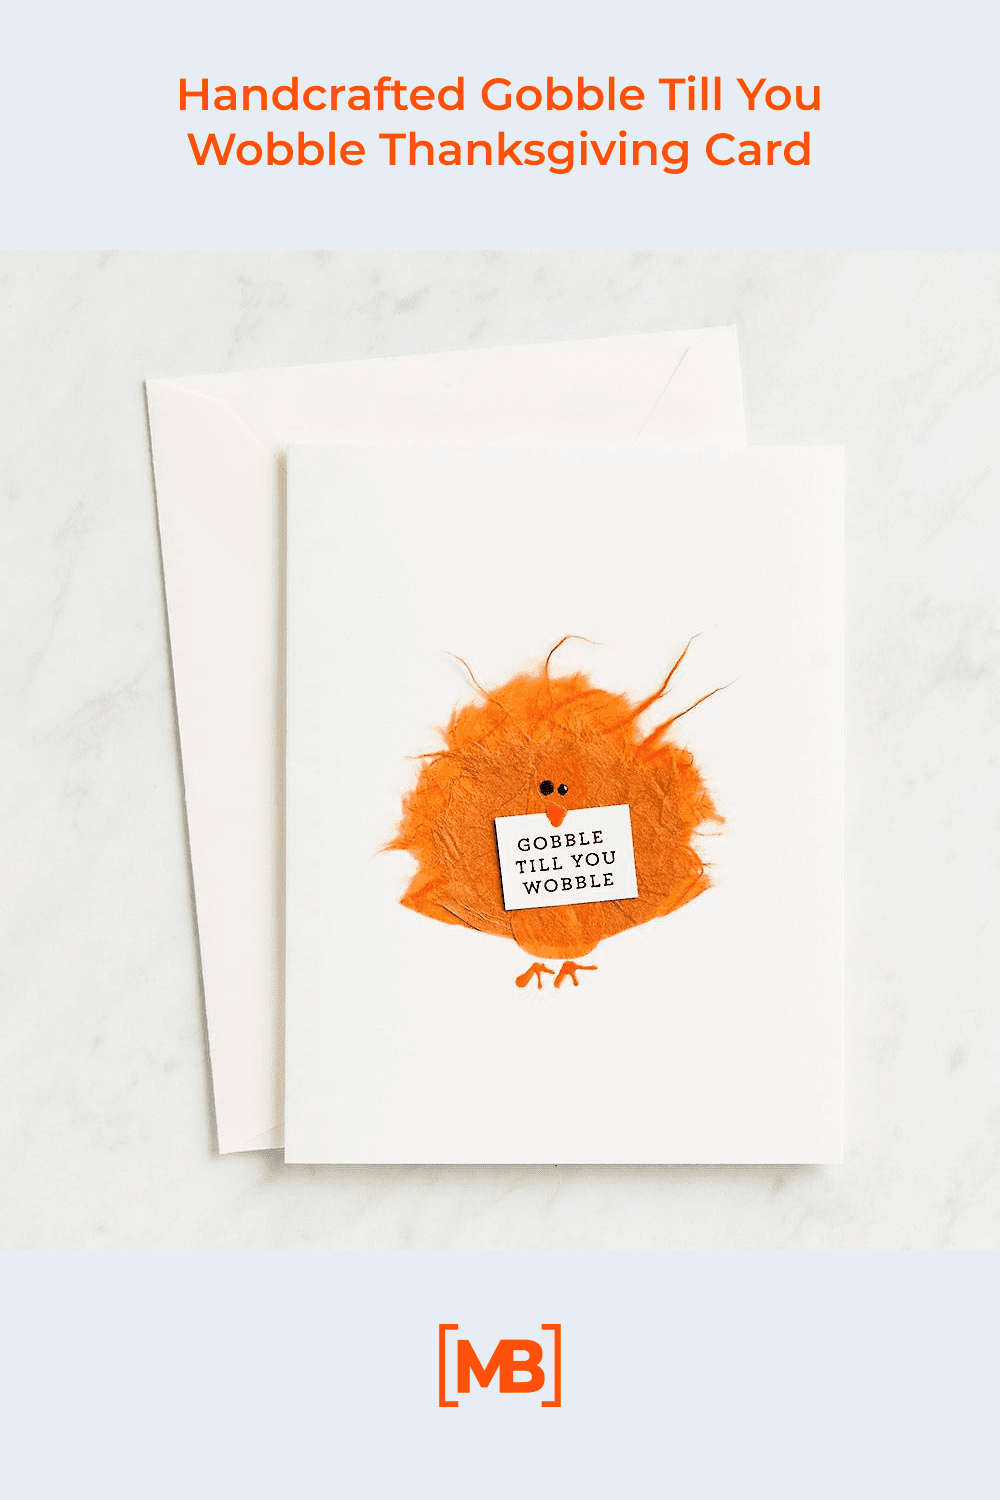 Handcrafted gobble till you wobble Thanksgiving card.